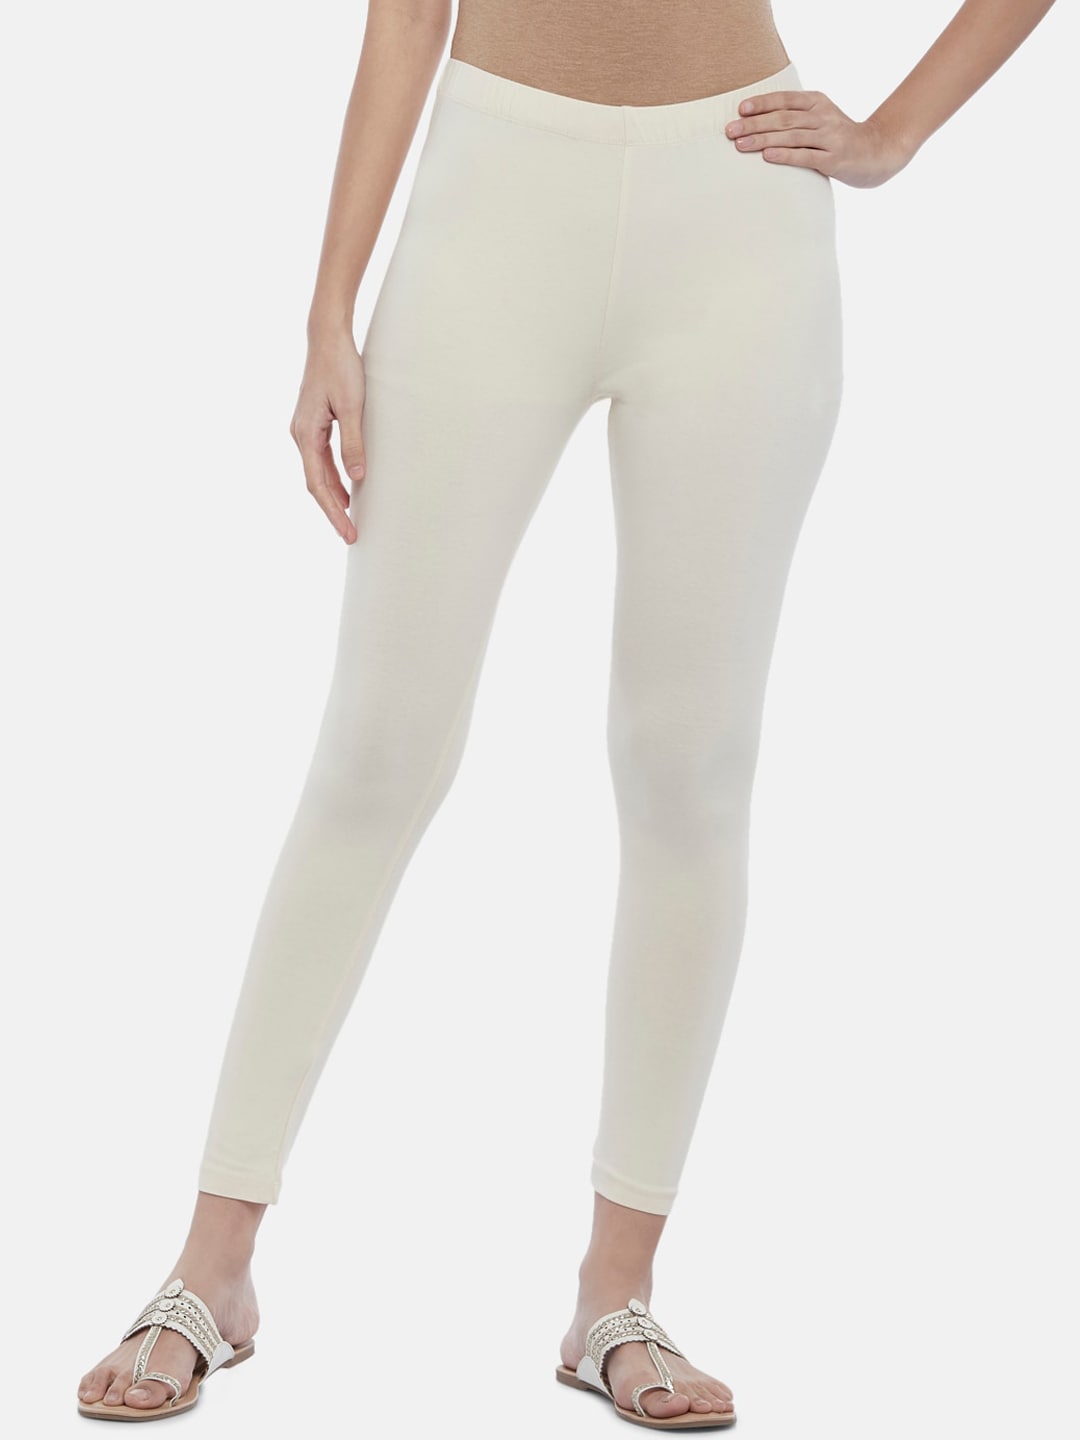 RANGMANCH BY PANTALOONS Women Off White Solid Ankle-Length Leggings Price in India